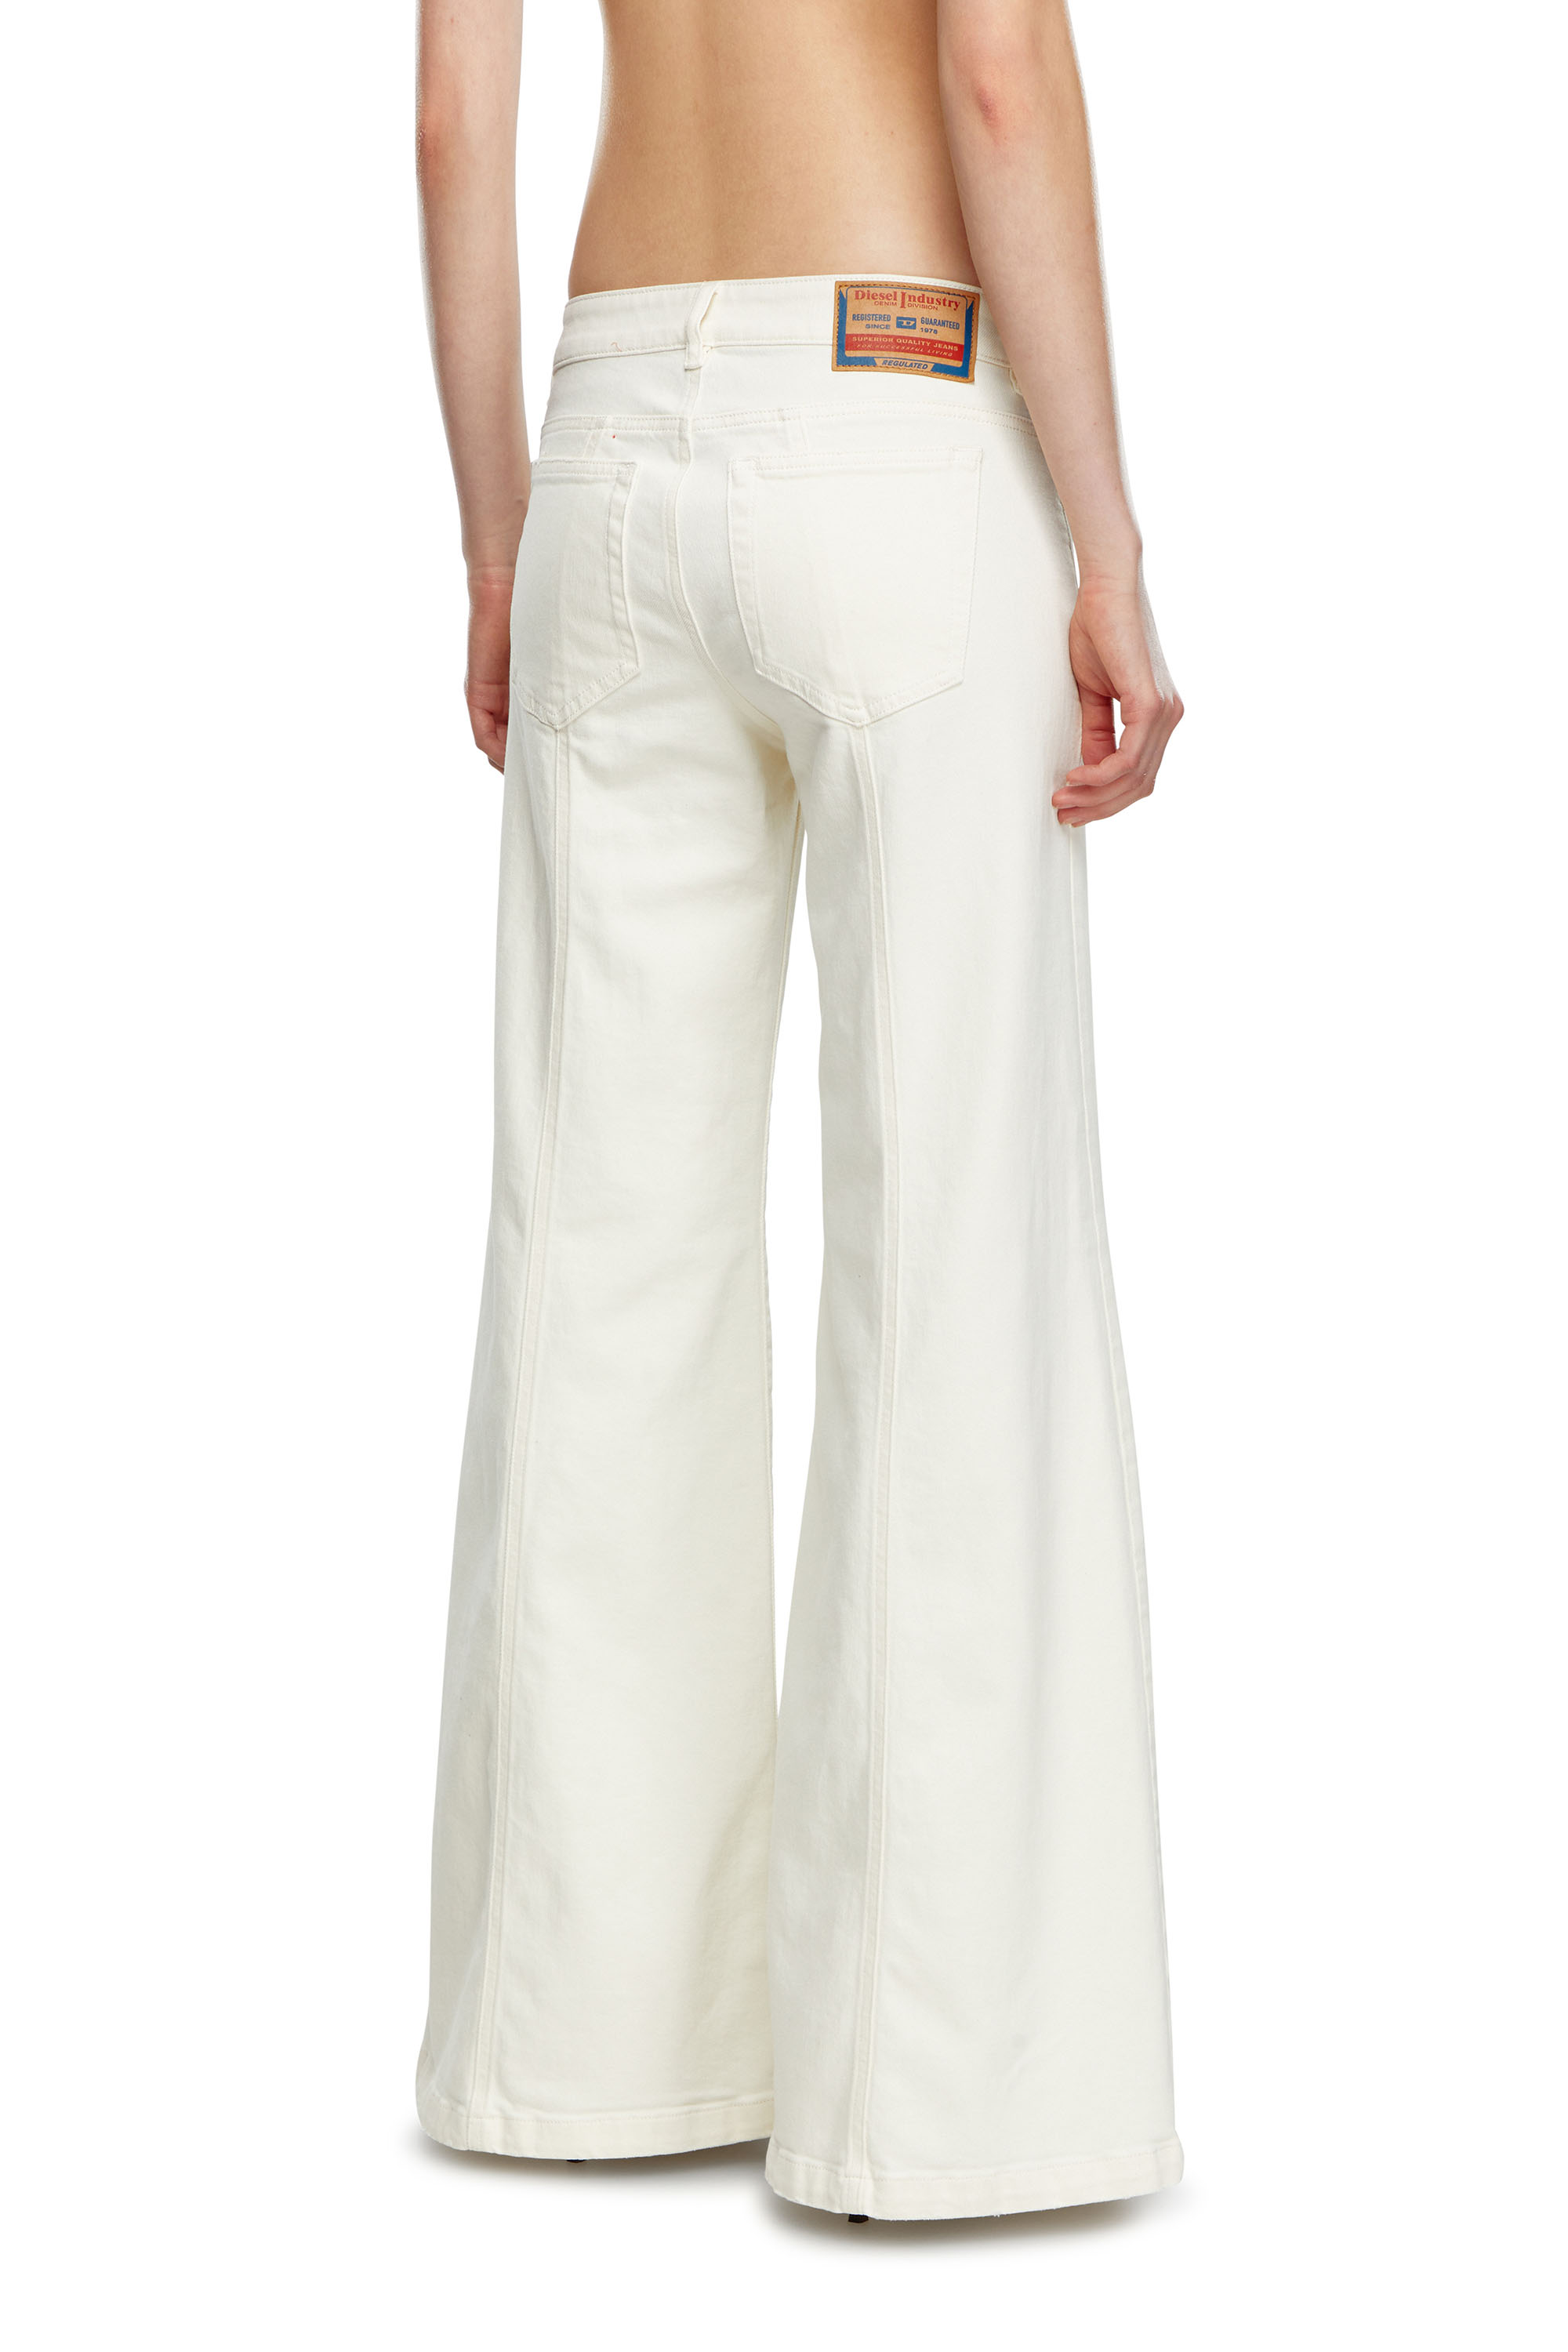 Diesel - Bootcut and Flare Jeans D-Akii 09J68, Mujer Bootcut y Flare Jeans - D-Akii in Blanco - Image 3